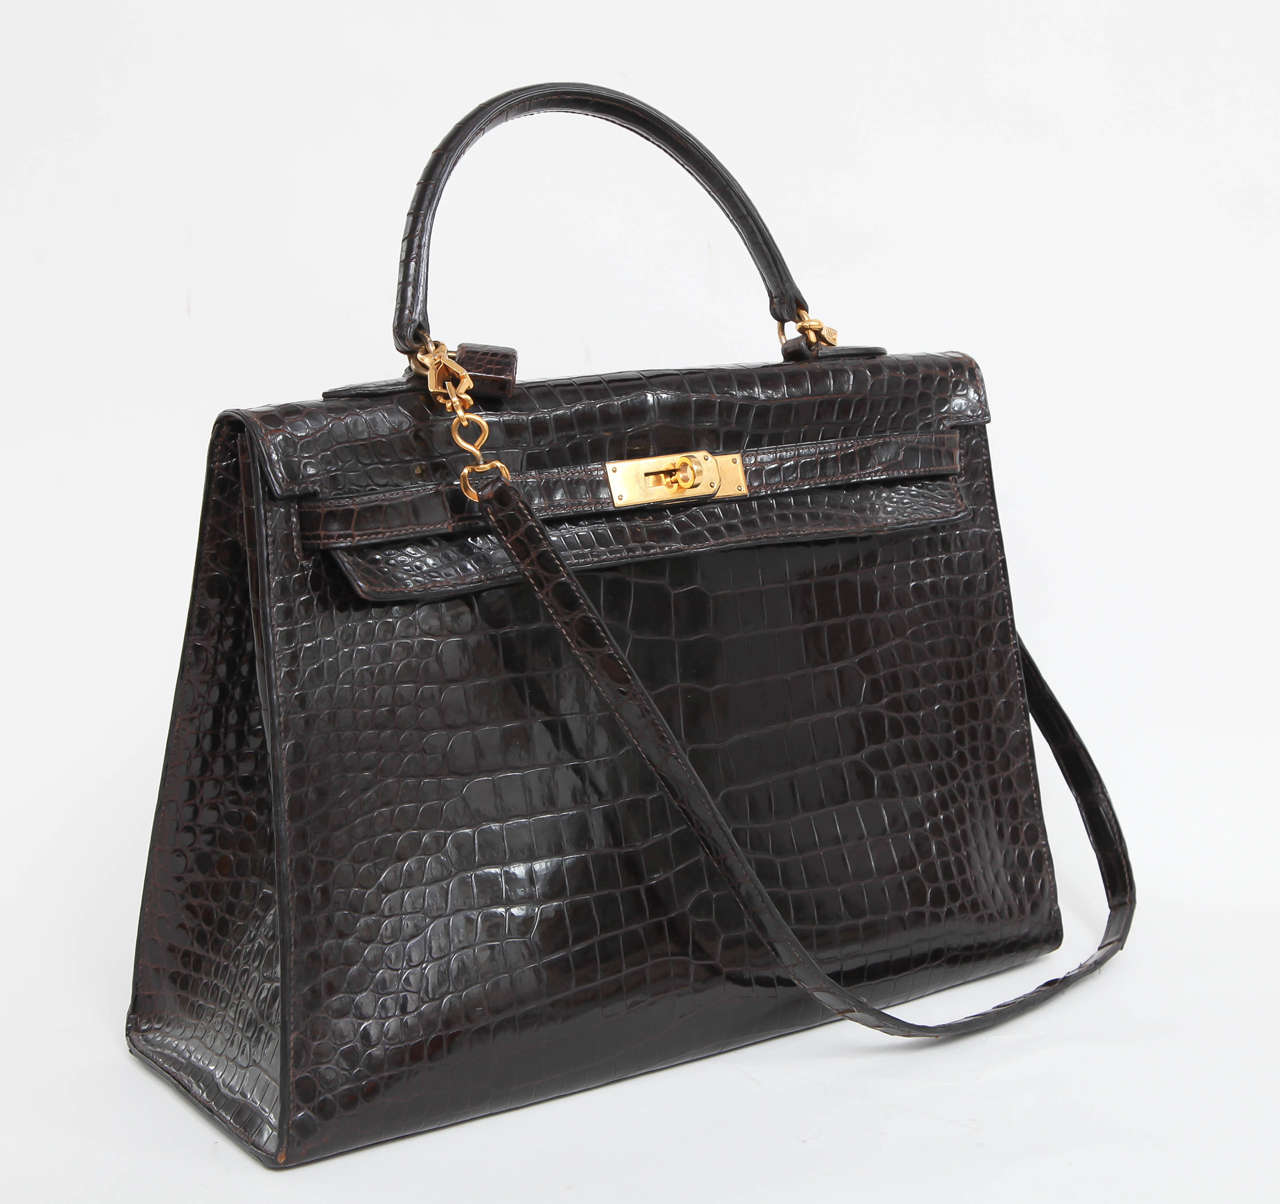 A fabulous vintage classic in dark brown alligator Hermes Kelly bag from the 1960s with rare lock in great condition
This is an unusual size  which has not been made for several years,